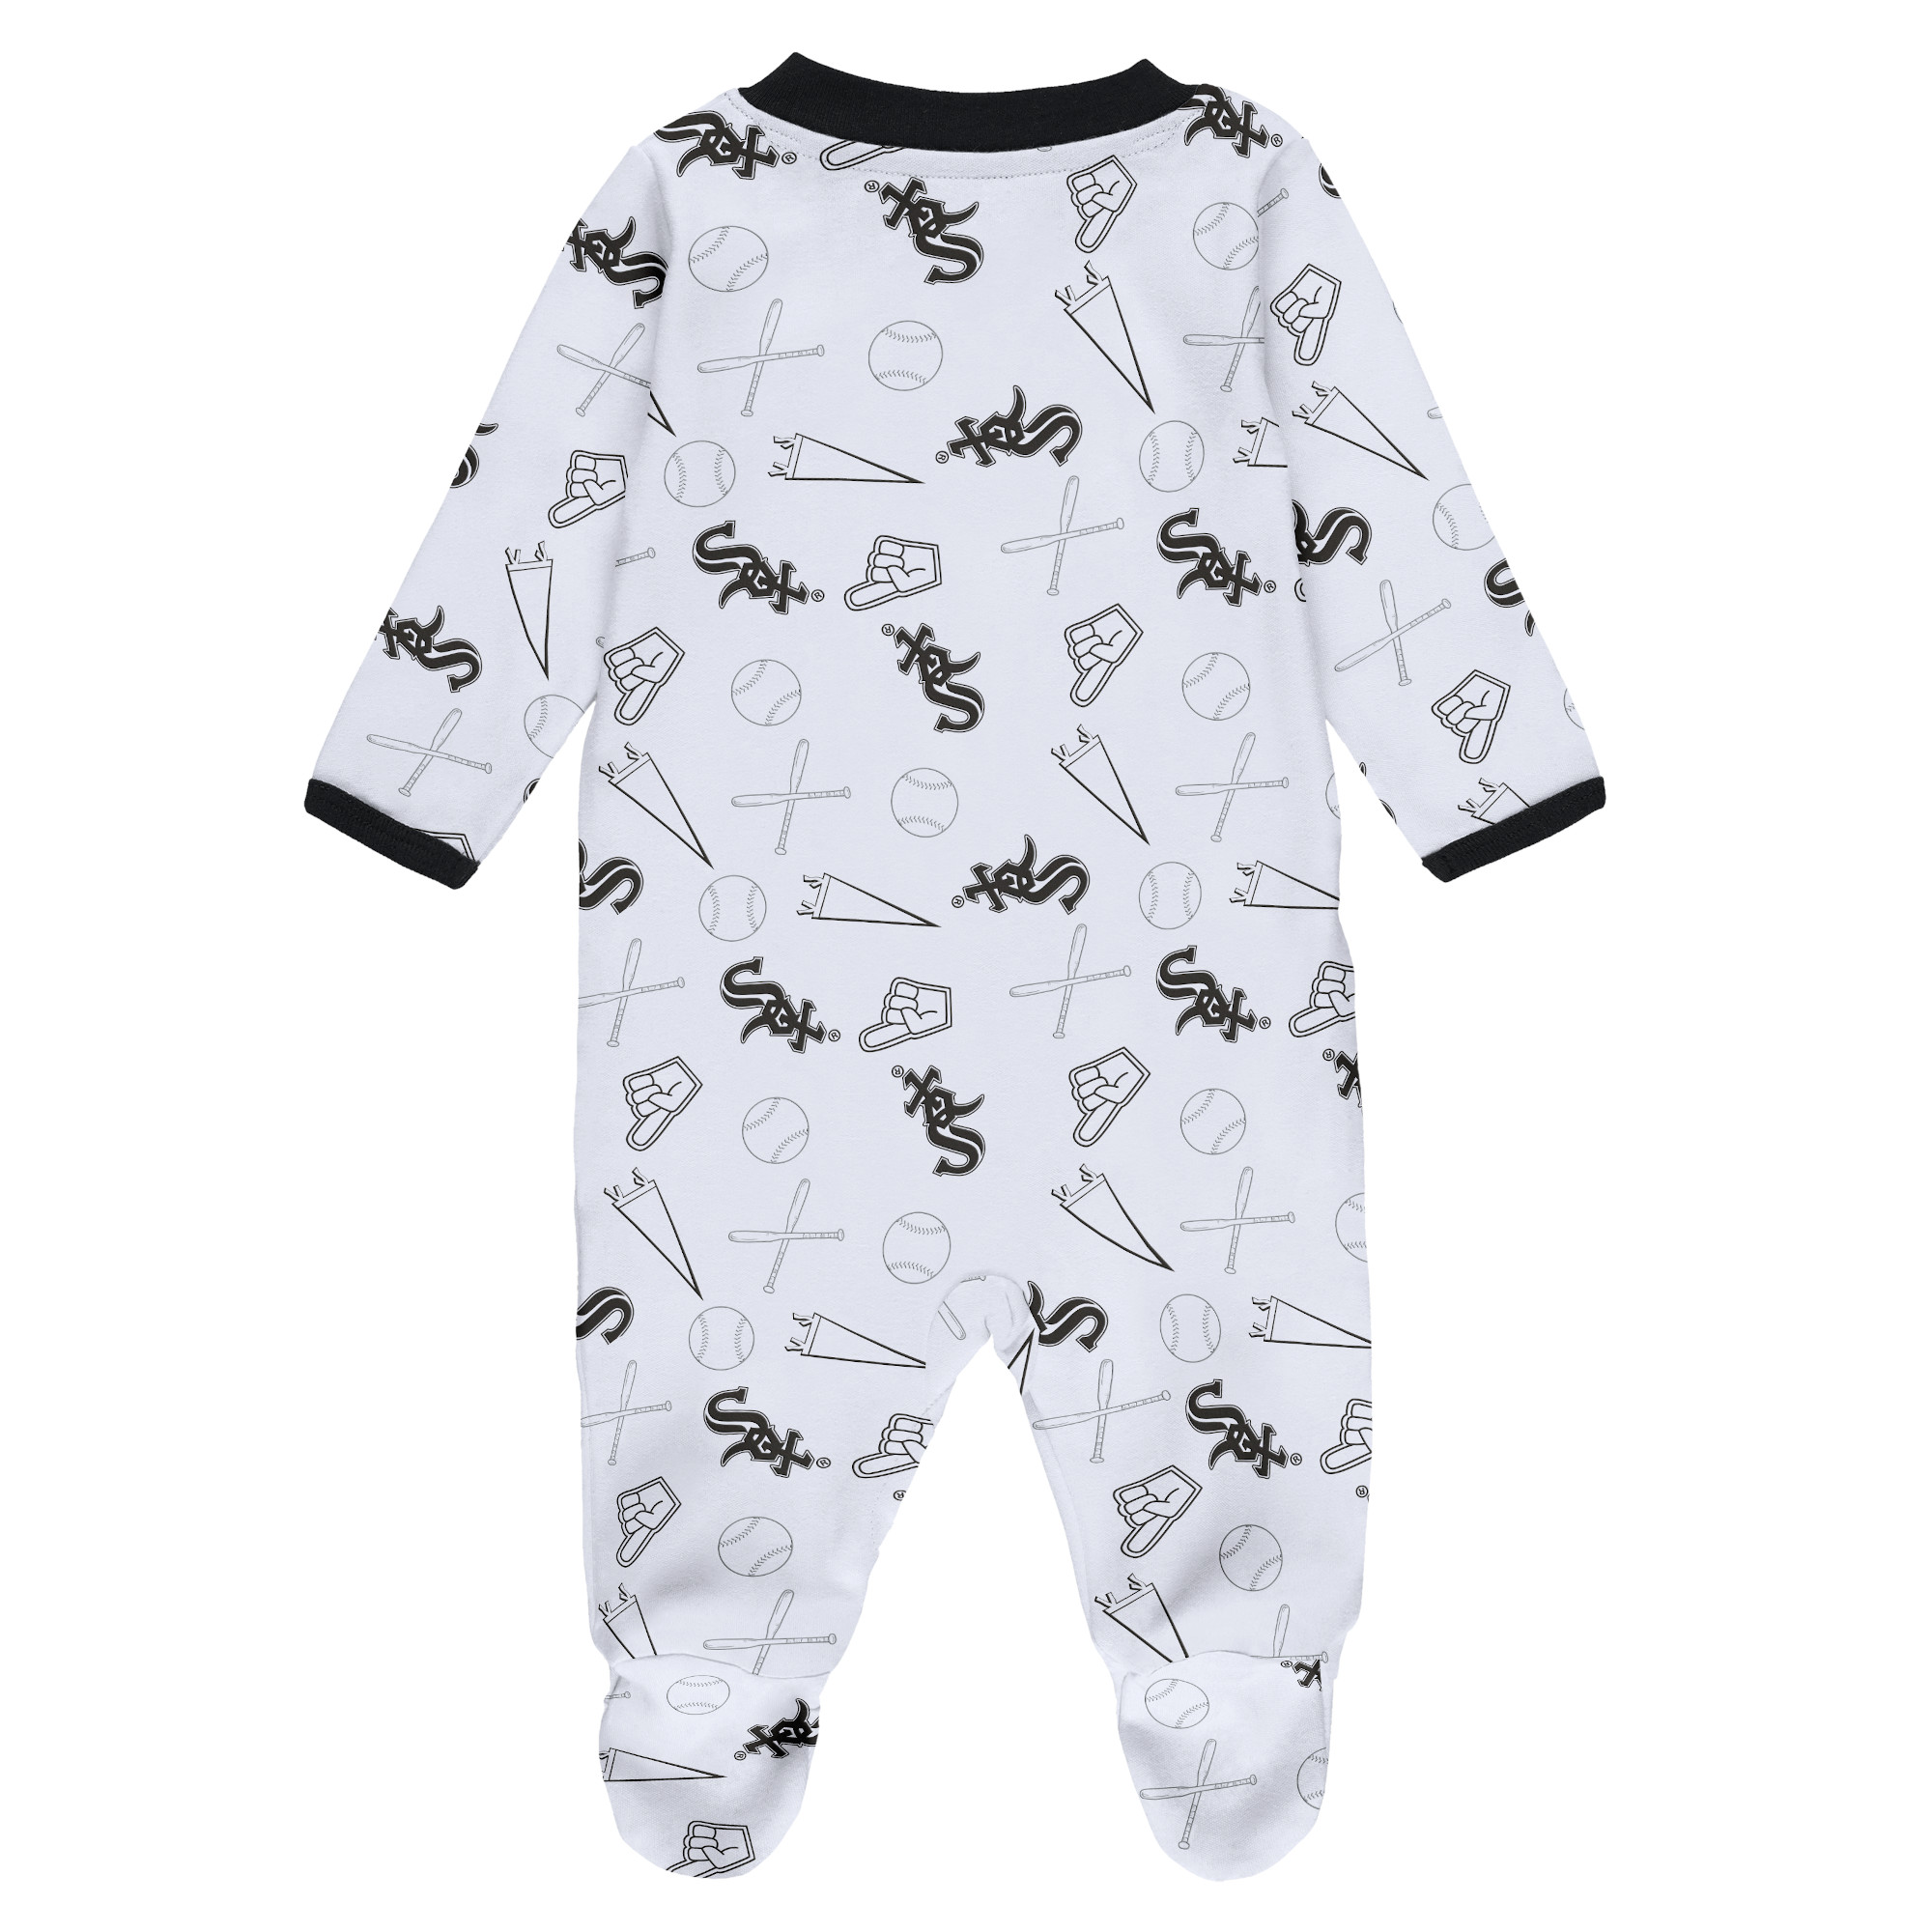 Newborn & Infant WEAR by Erin Andrews White Chicago White Sox Sleep & Play Full-Zip Footed Jumper with Bib - image 3 of 5